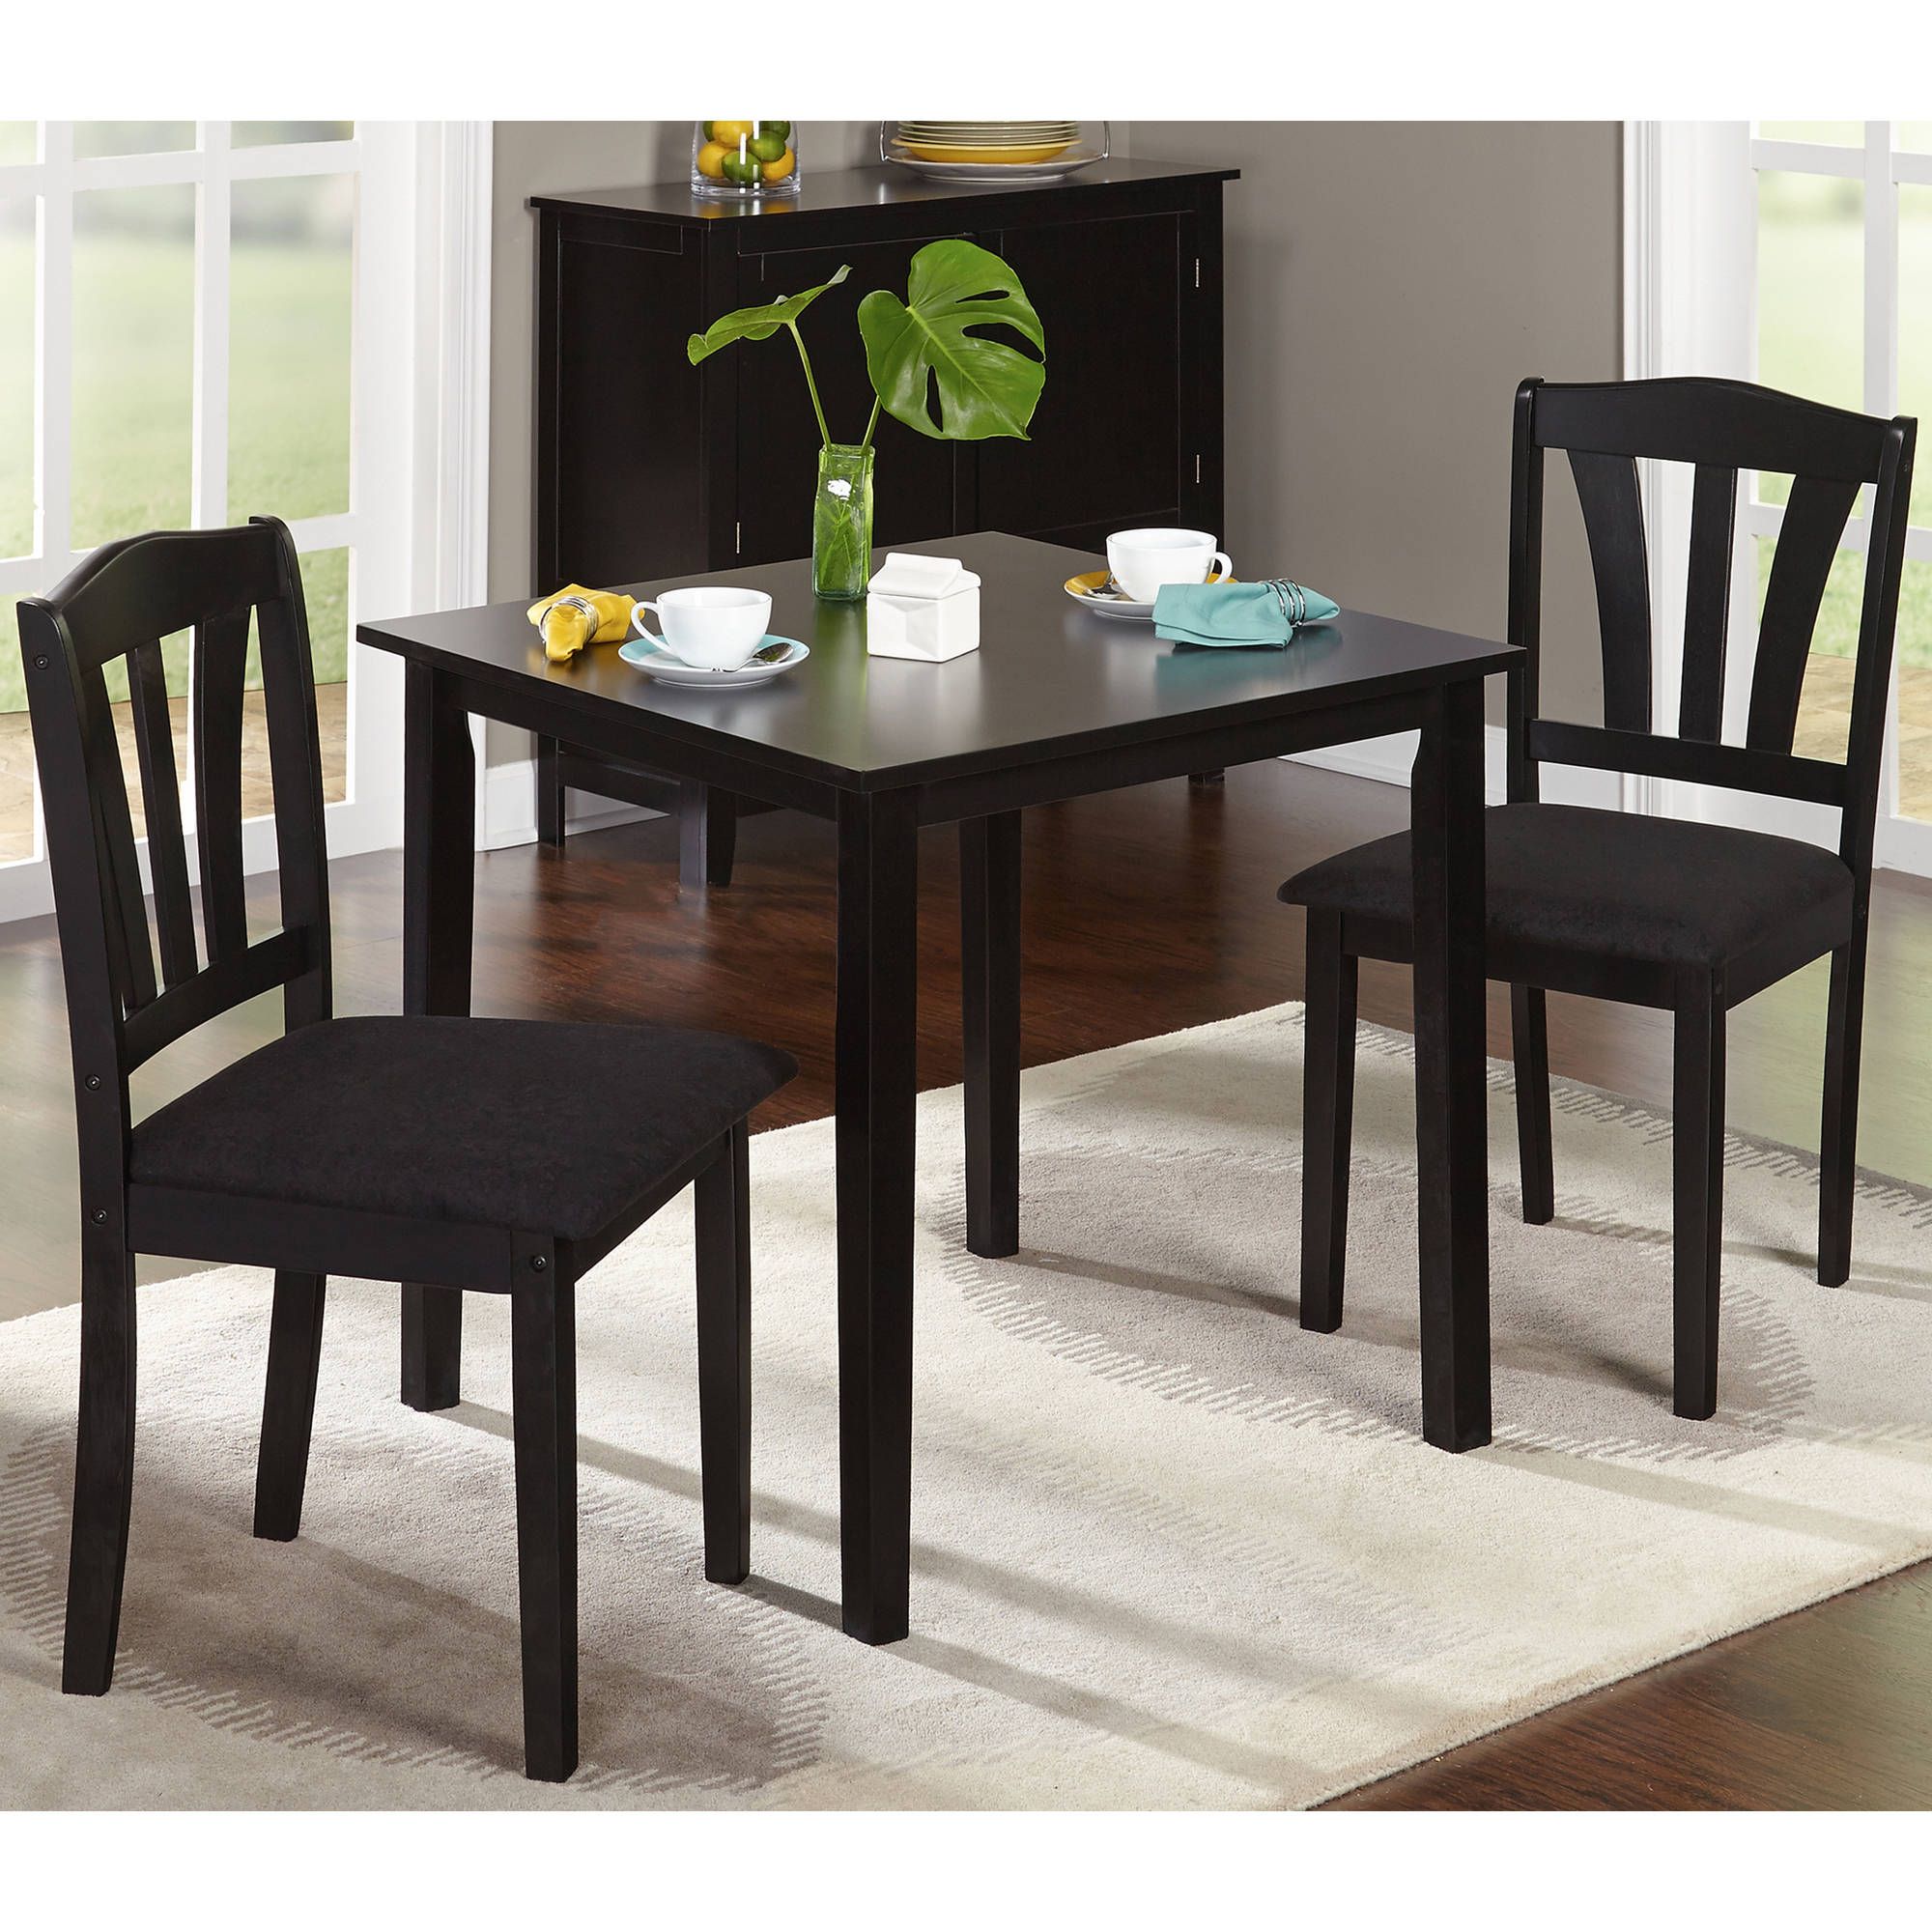 3 Piece Breakfast Dining Sets Pertaining To Fashionable Metropolitan 3 Piece Dining Set, Multiple Finishes (View 1 of 20)